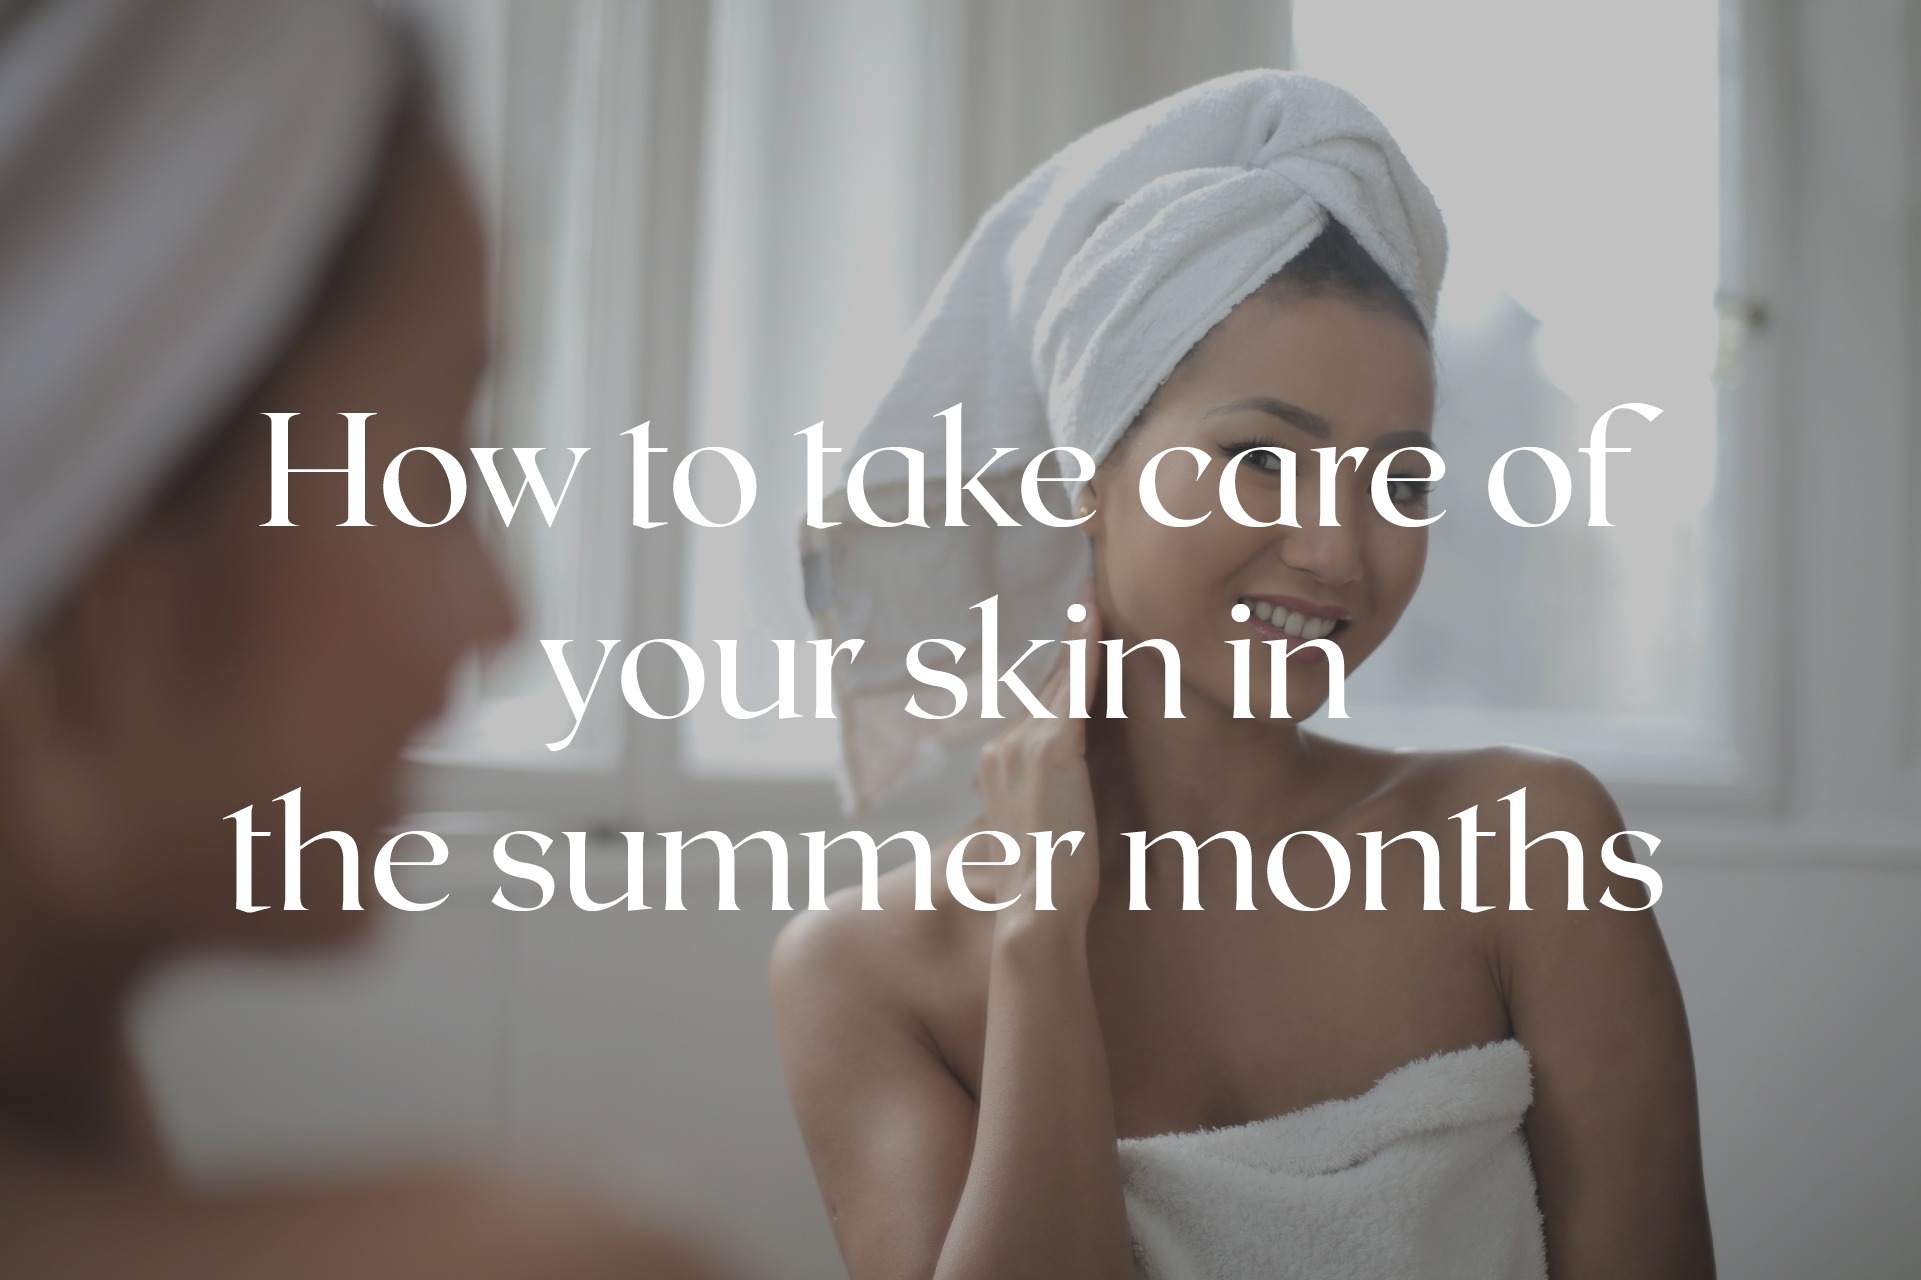 How to take care of your skin in the summer months